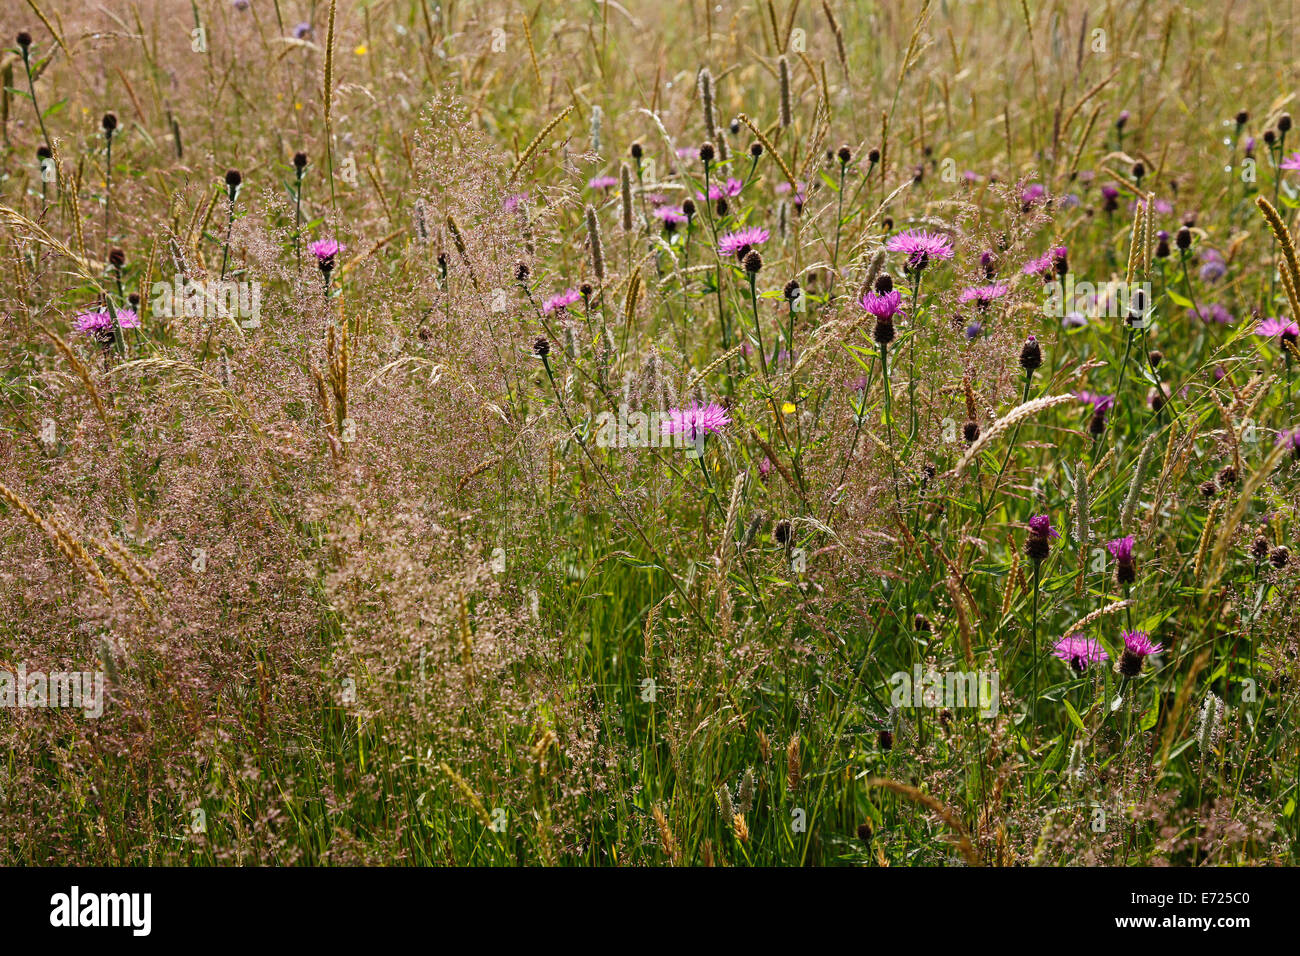 England, East Sussex, Rotherfield, Wild flower meadow of grasses and clovers. Stock Photo